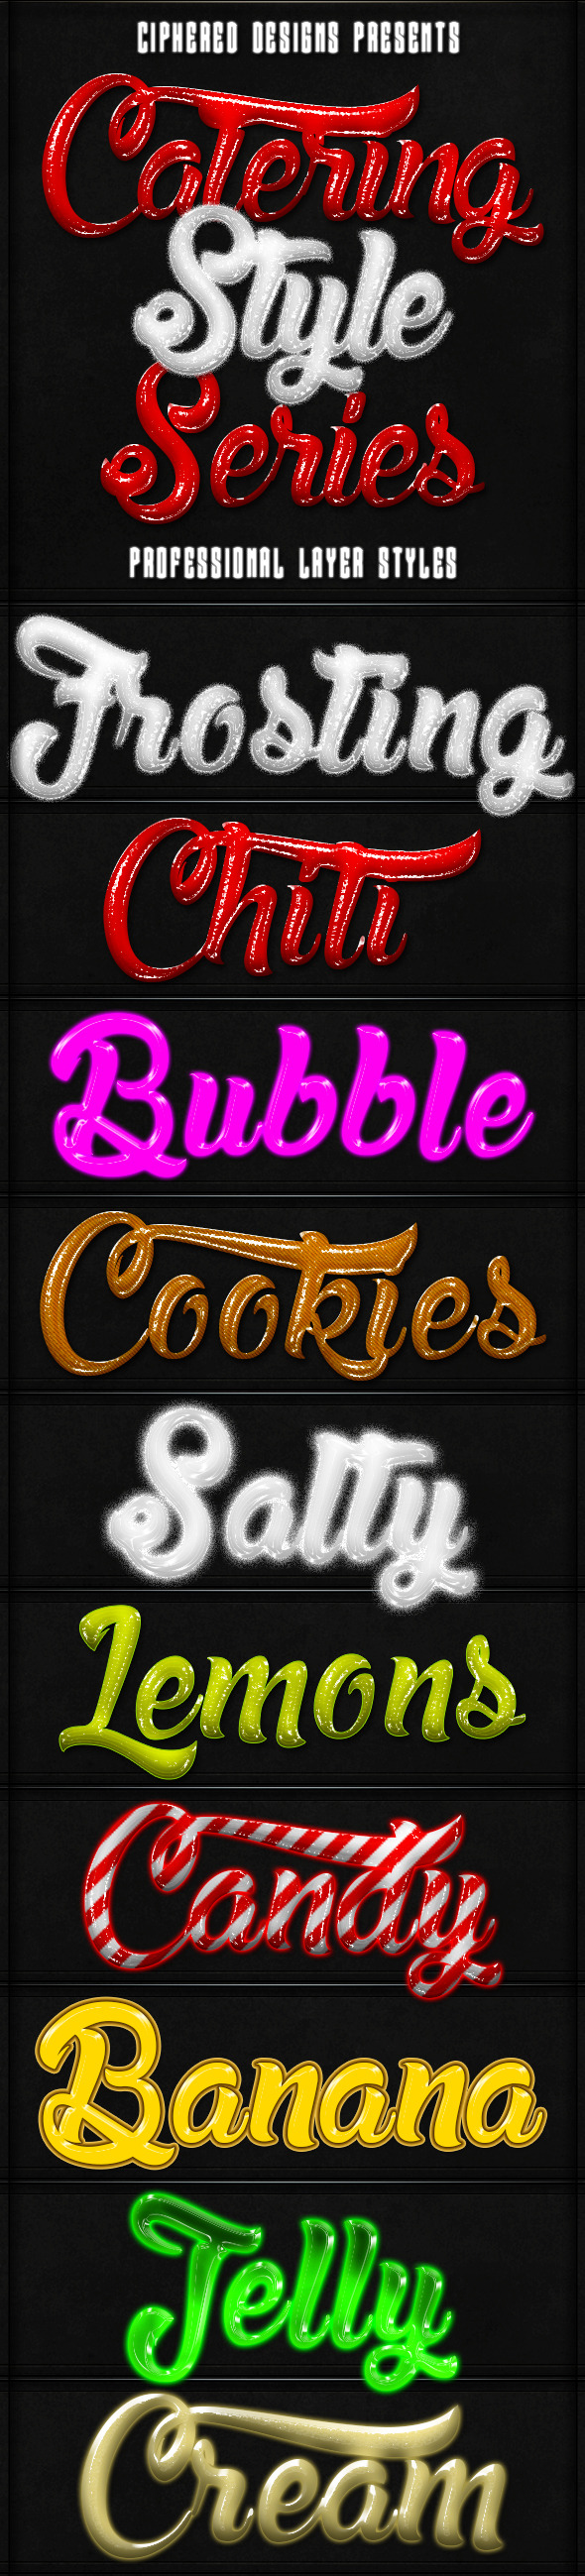 Catering Style Series - Text Effects